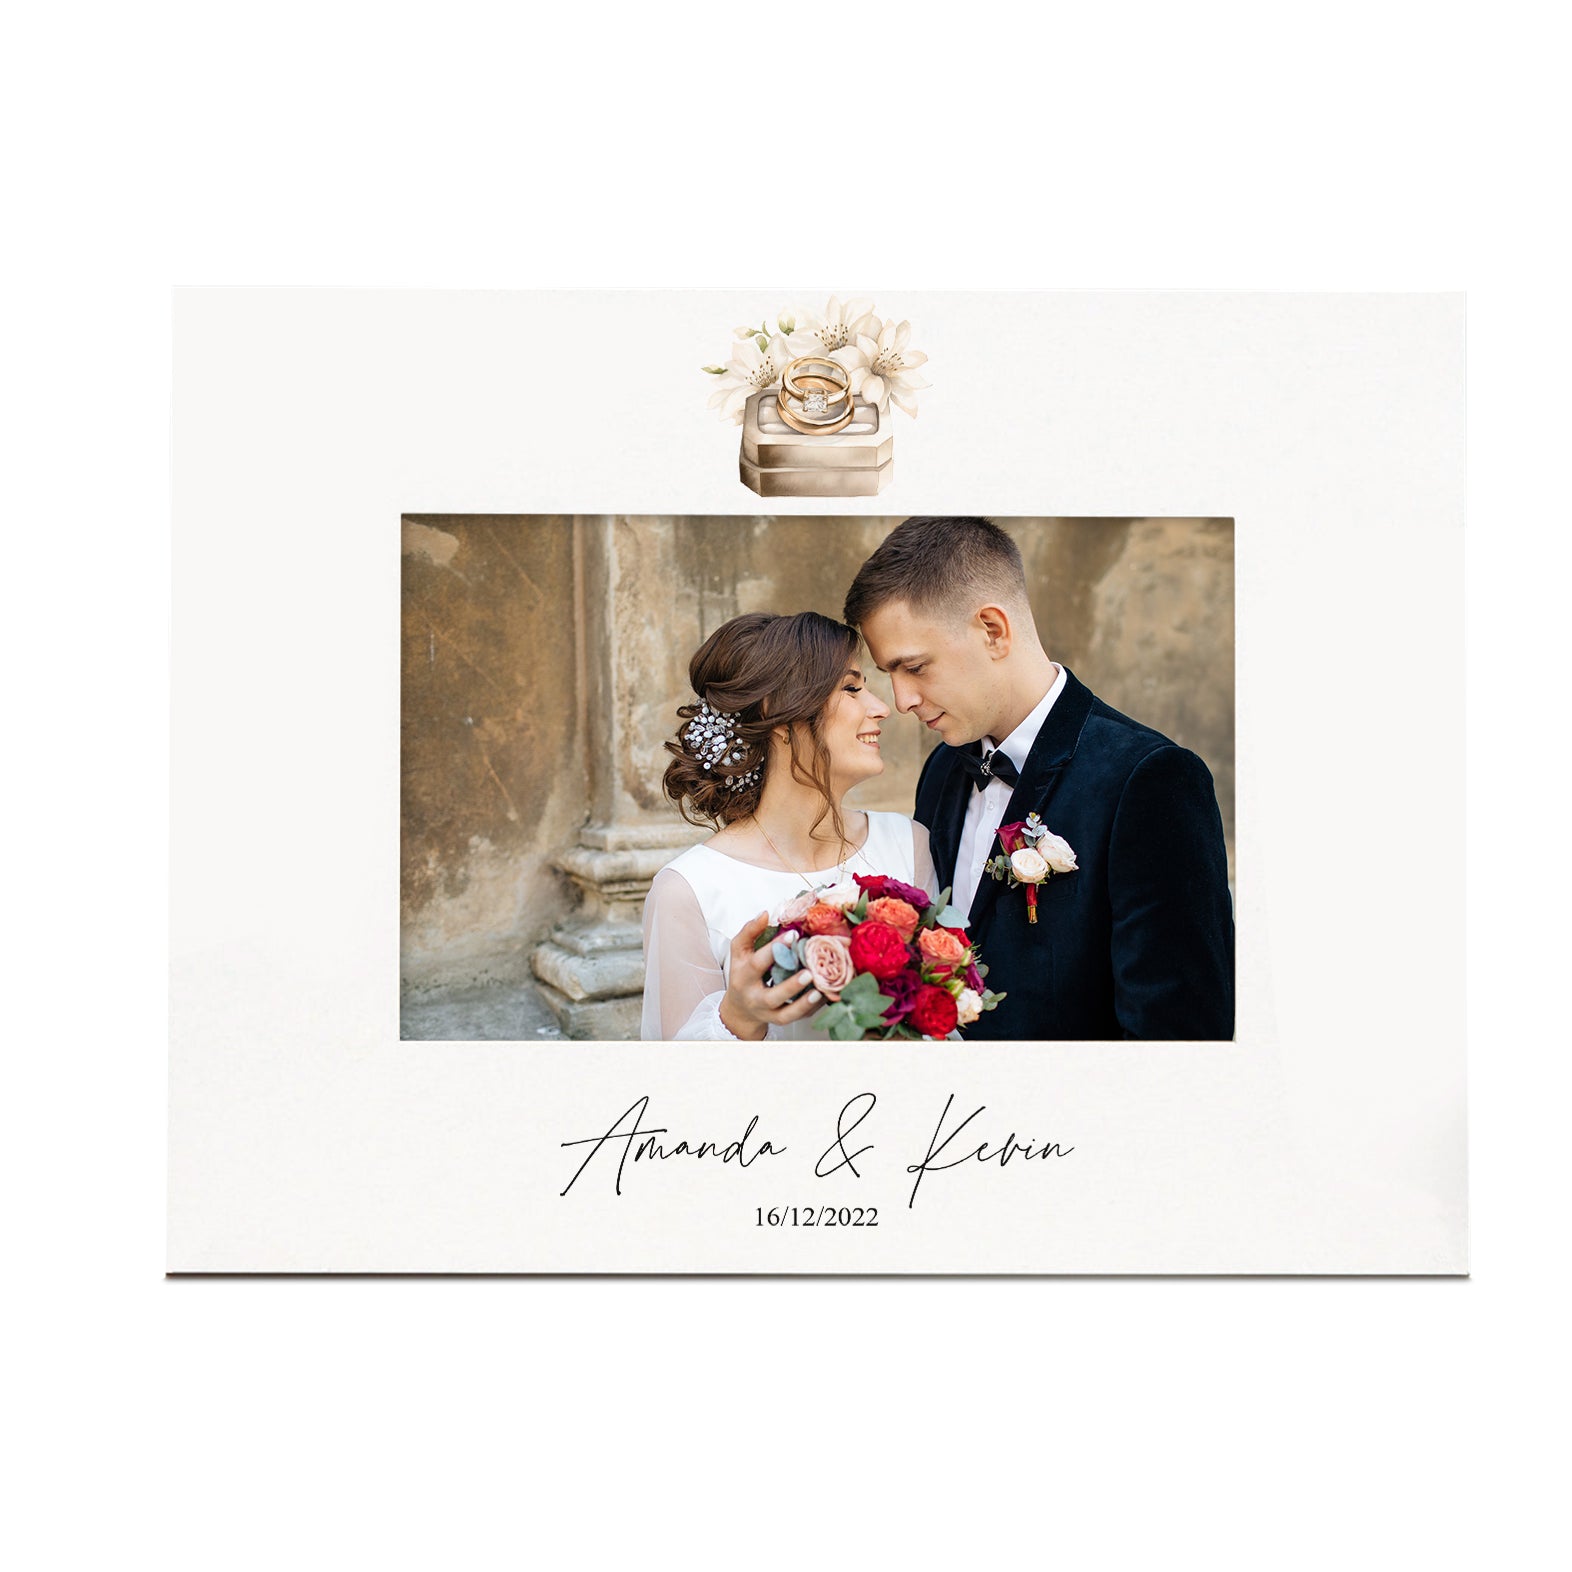 Personalised Wedding Day Photo Picture Frame With Floral Ring Box